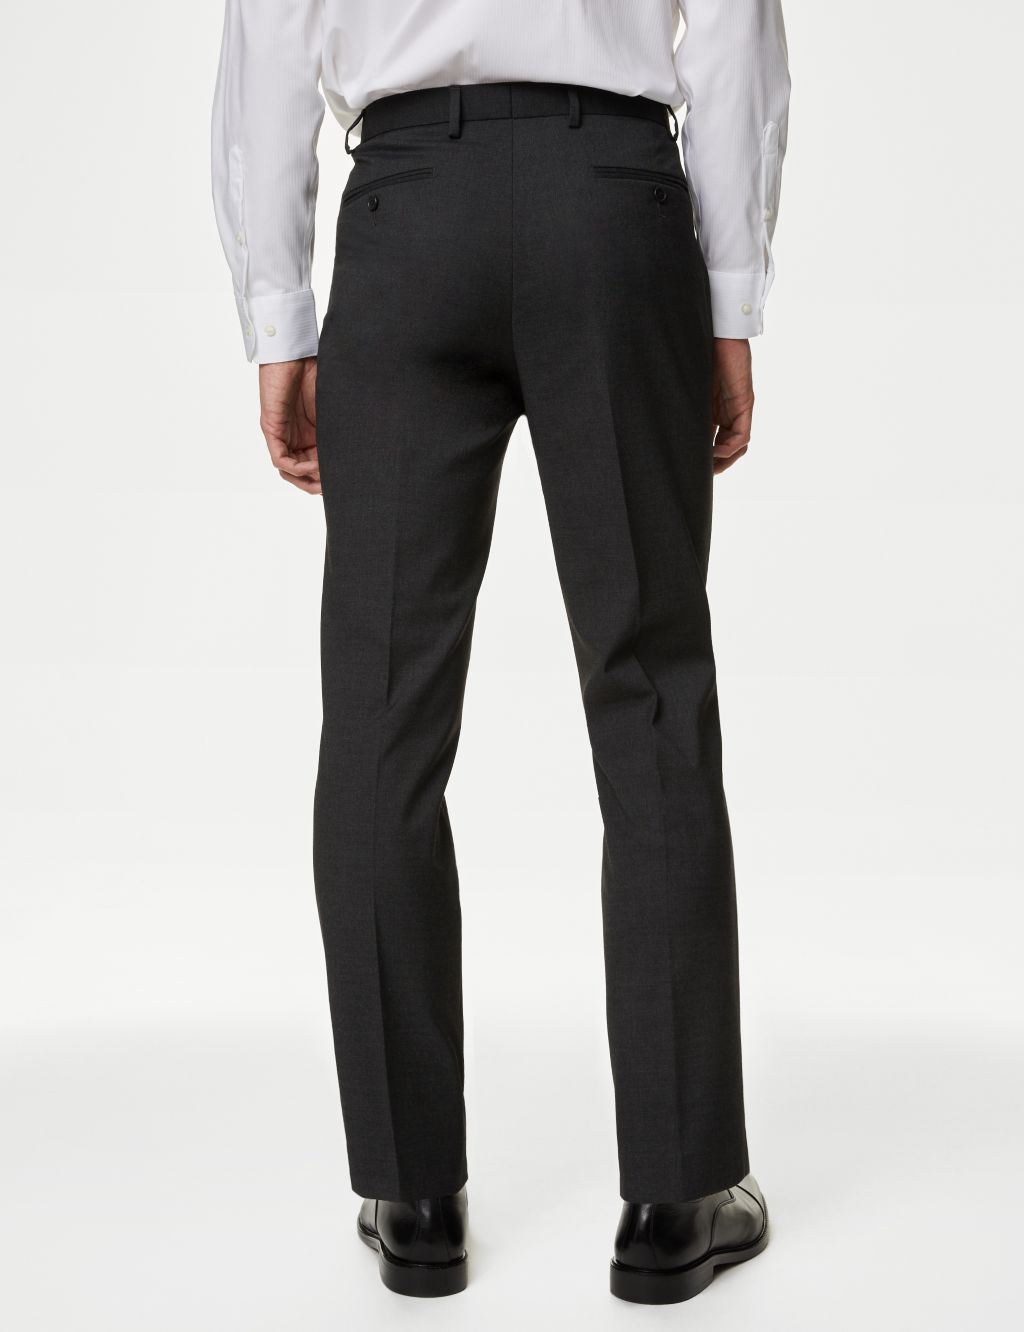 Slim Fit Stretch Suit Trousers image 5